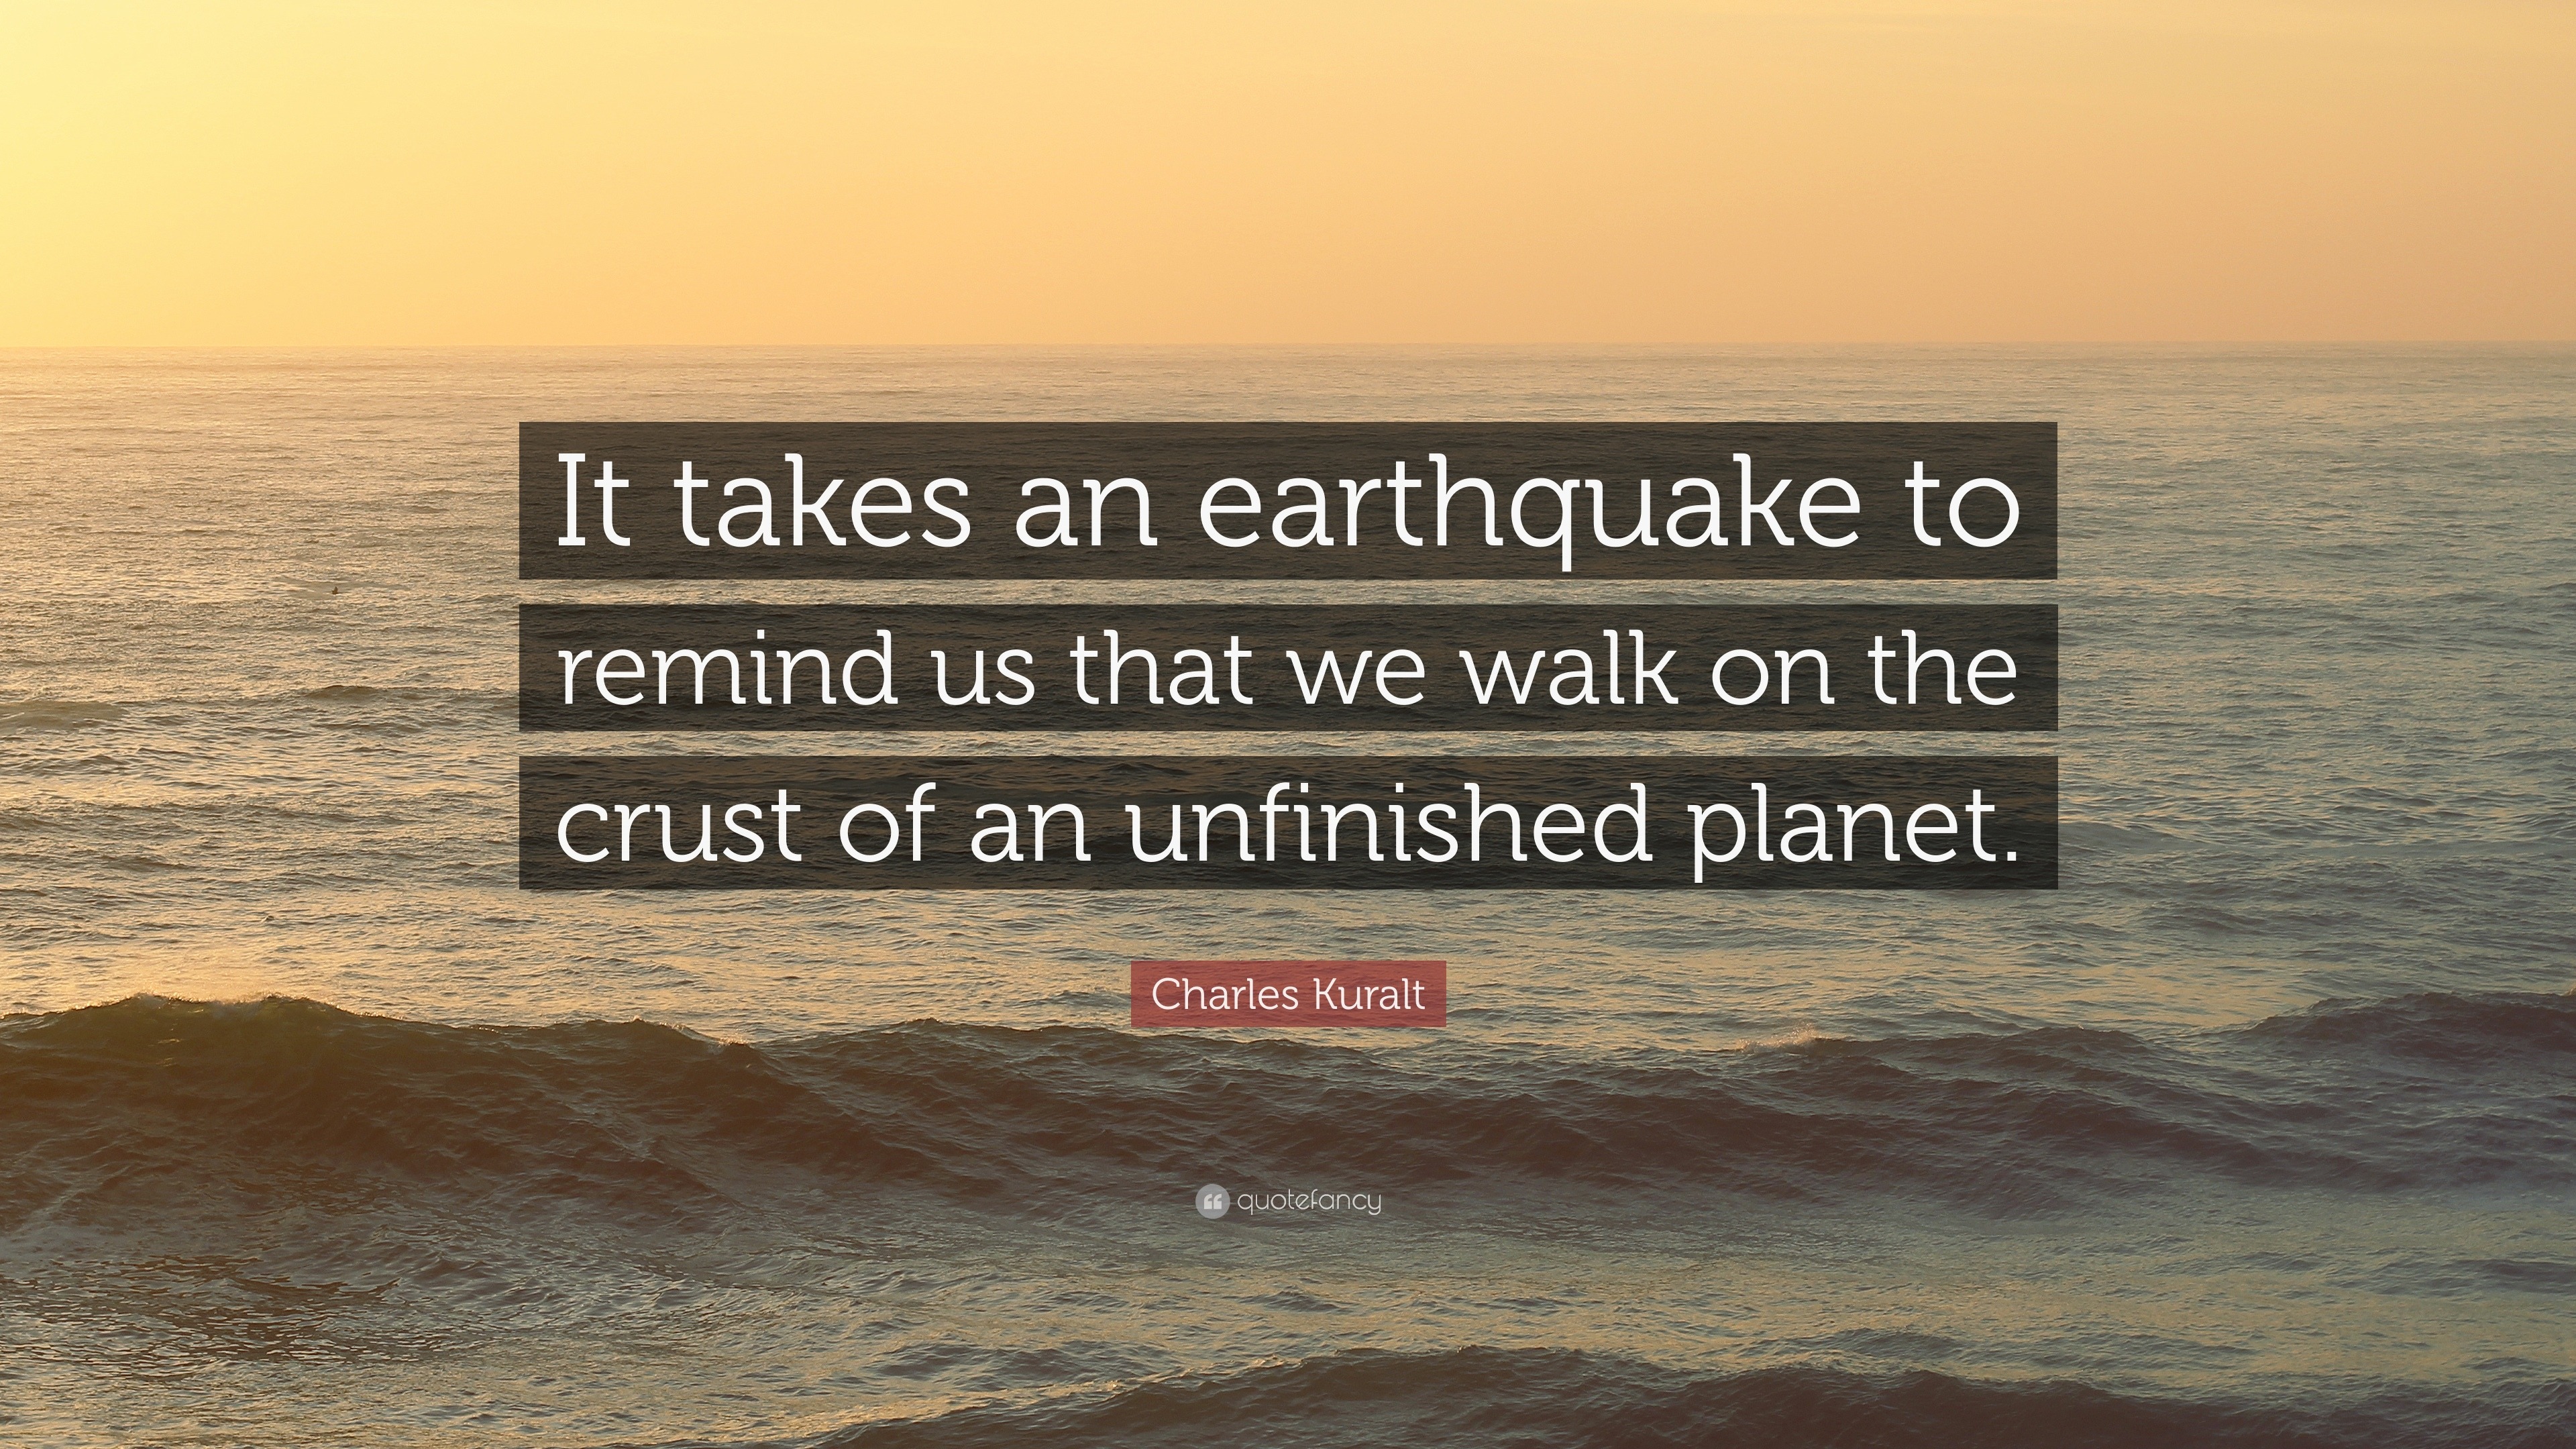 Charles Kuralt Quote “it Takes An Earthquake To Remind Us That We Walk On The Crust Of An